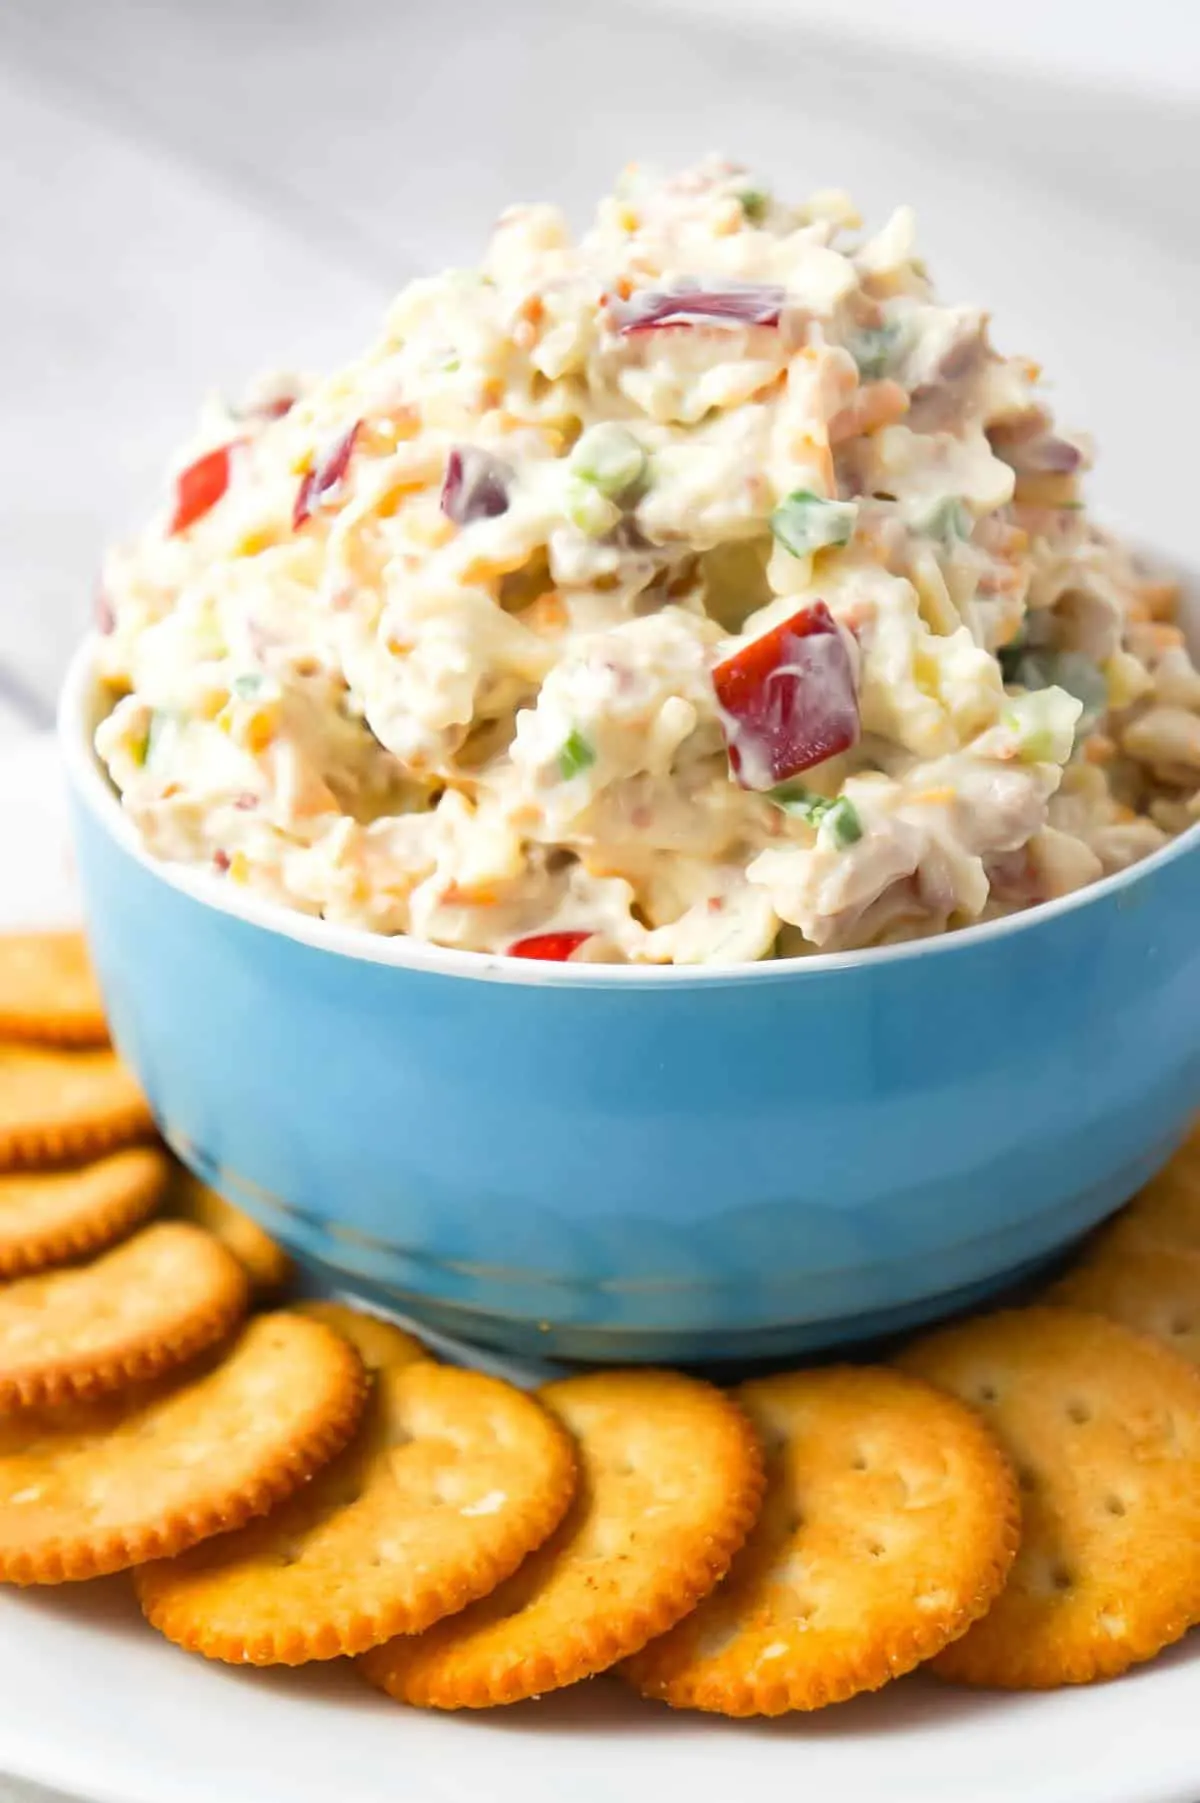 Bacon Apple Cheddar Dip is an easy cold party dip recipe loaded with diced apples, crumbled bacon, chopped walnuts, green onions and shredded cheddar cheese.